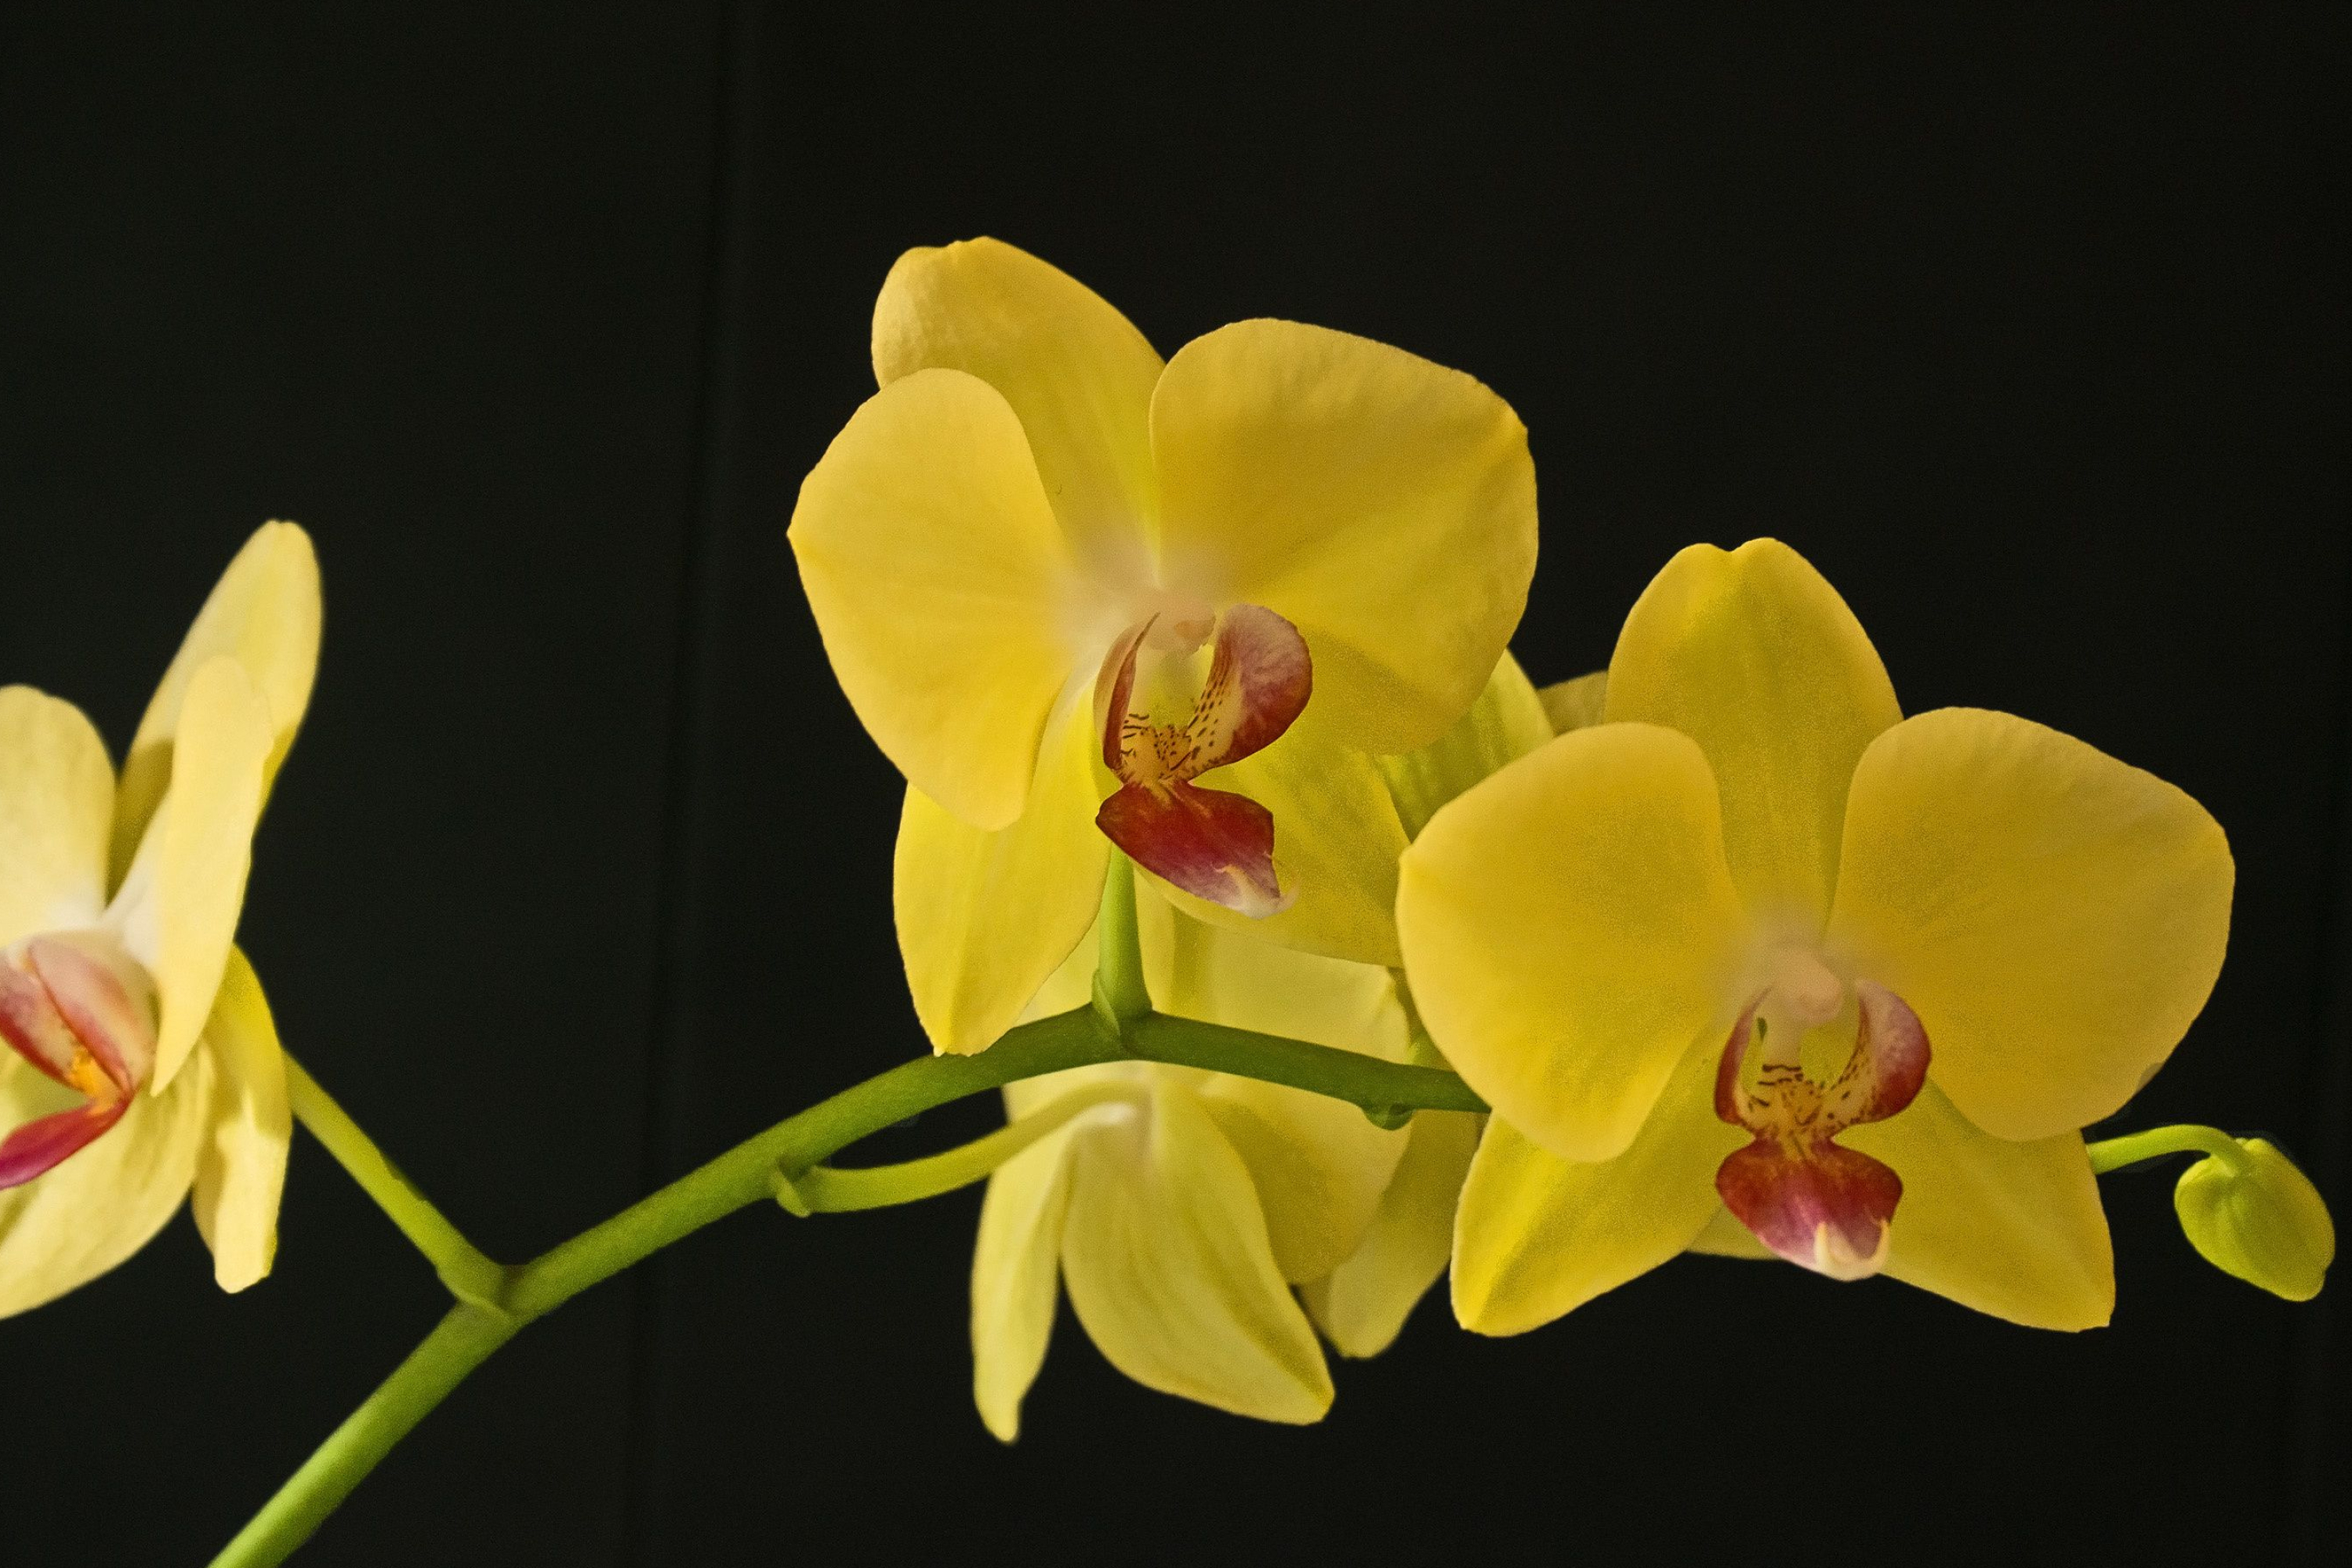 3000x2000 Nature Two different images with 5 different sized images per image Yellow Orchid Flowers Desktop Wallpapers Digital Downloads a-concept Photographs Home \u0026 Living